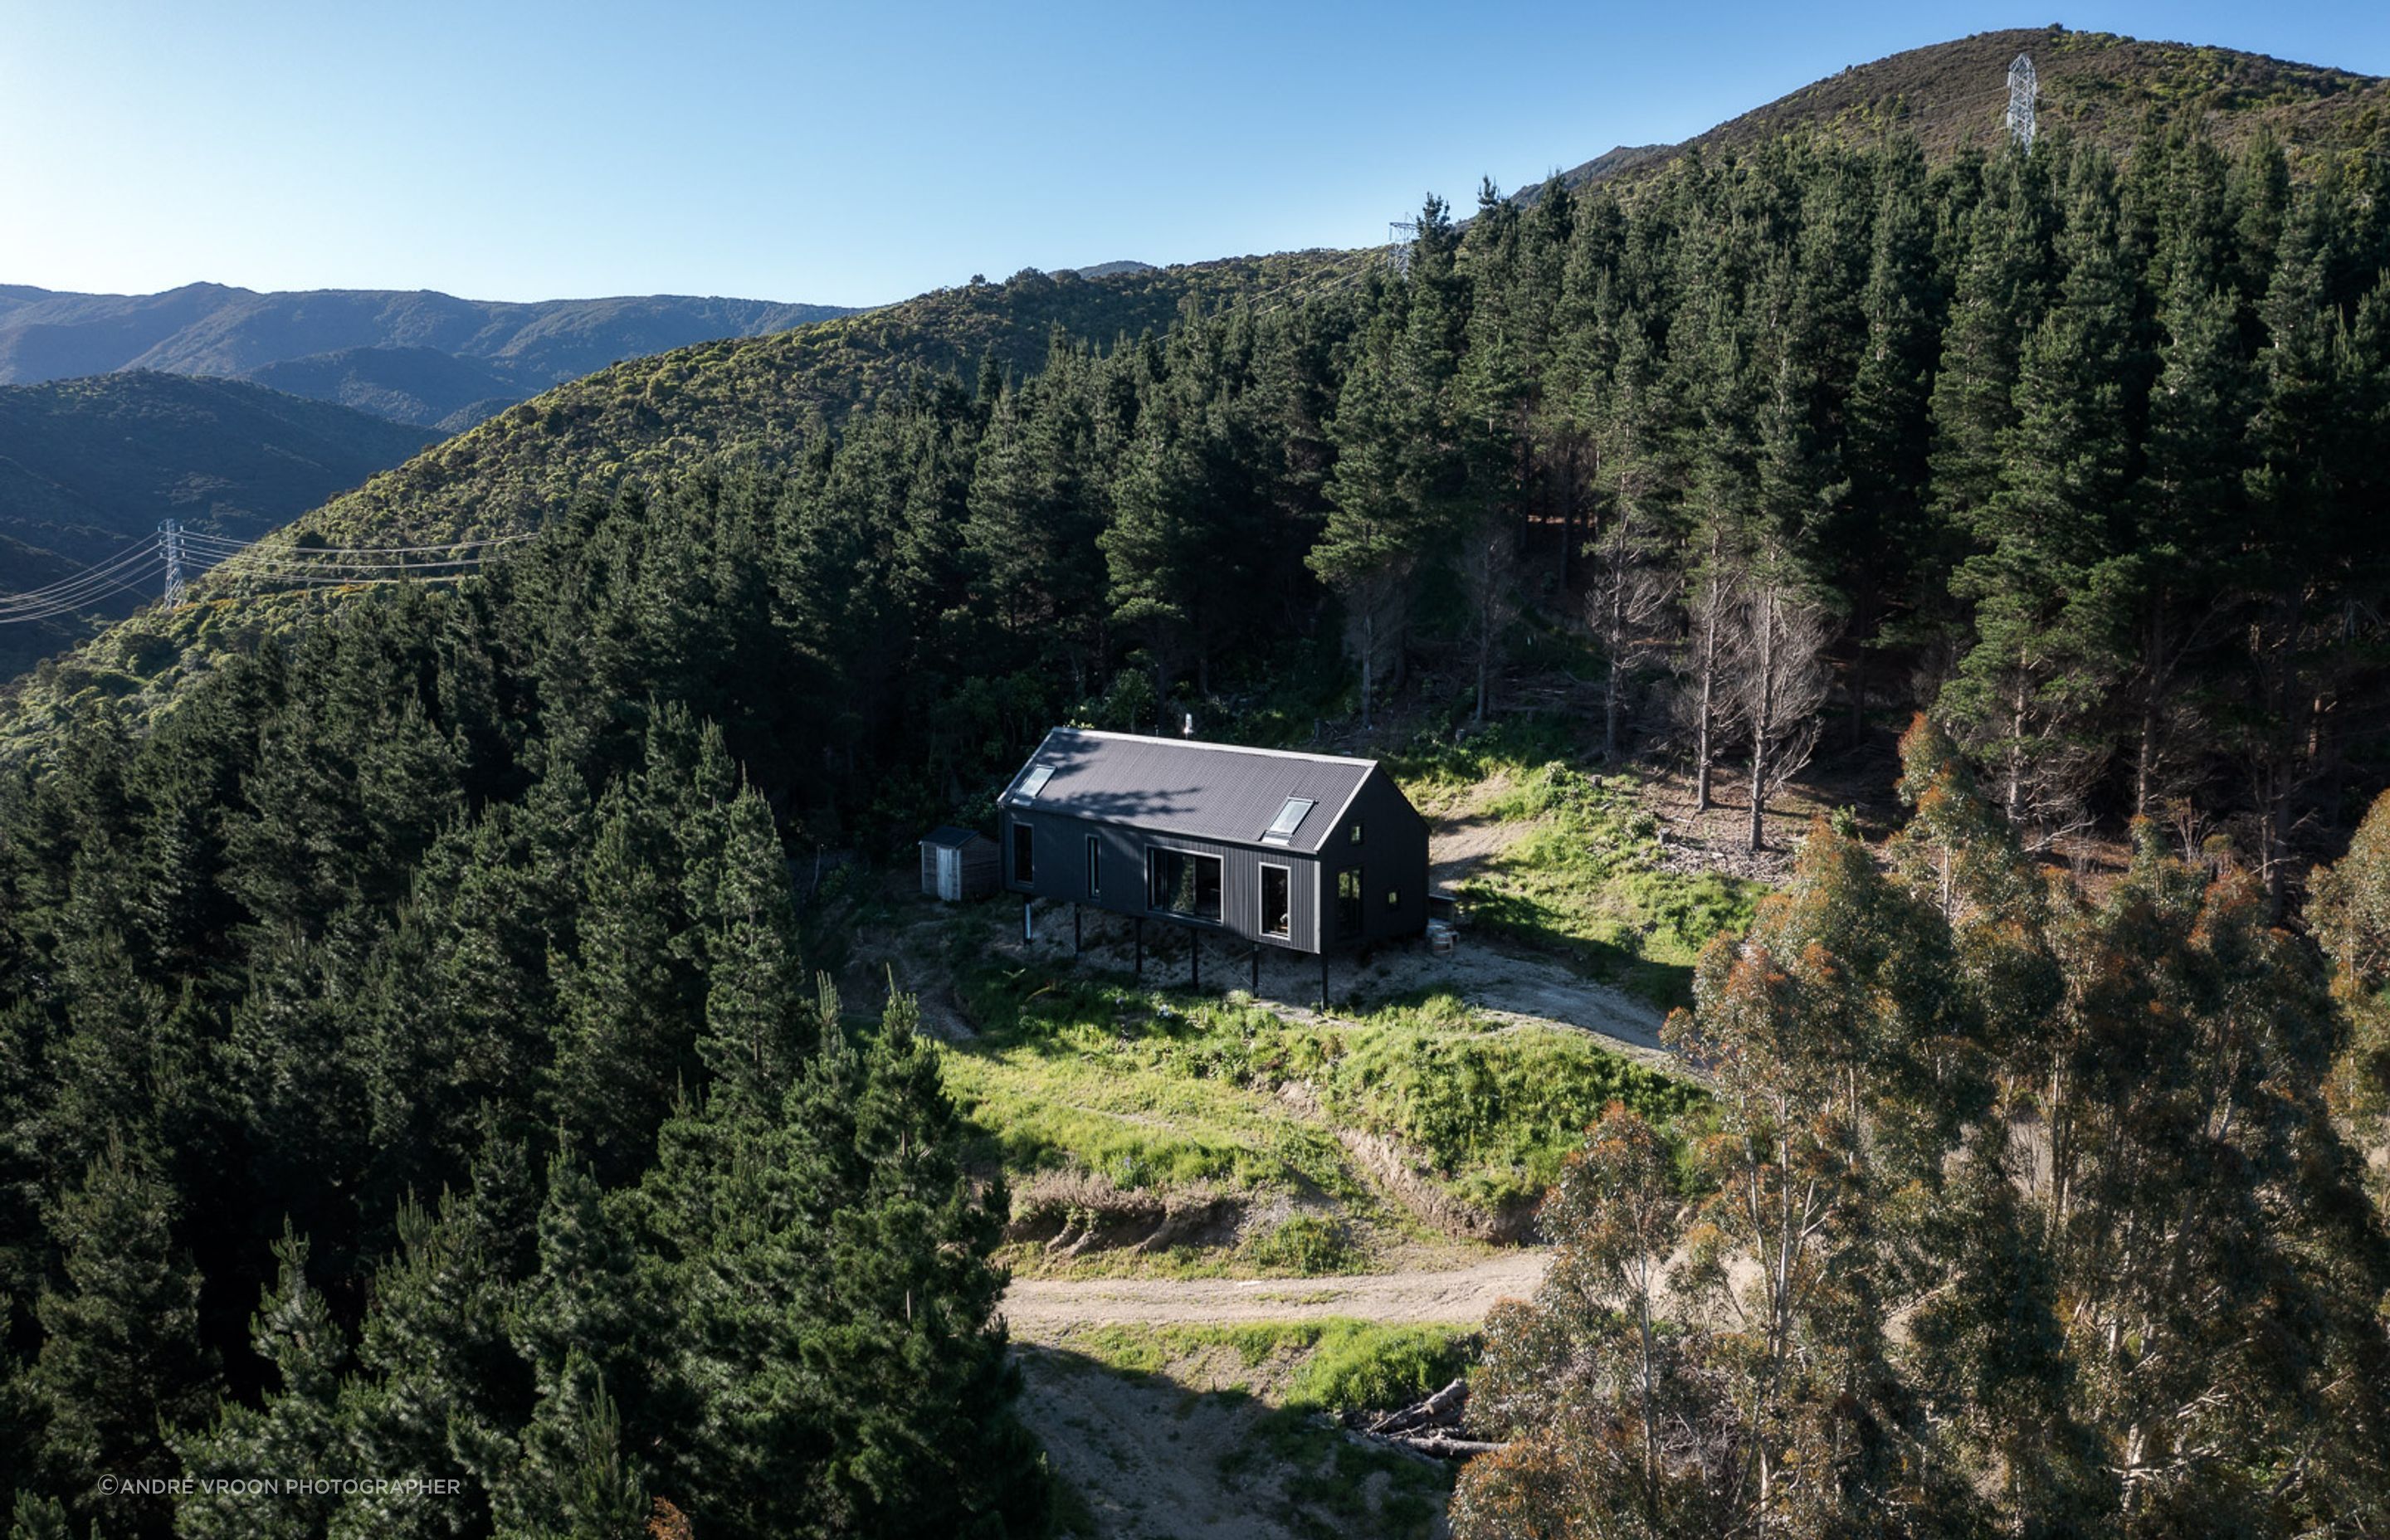 Nestled high in the Featherston hills